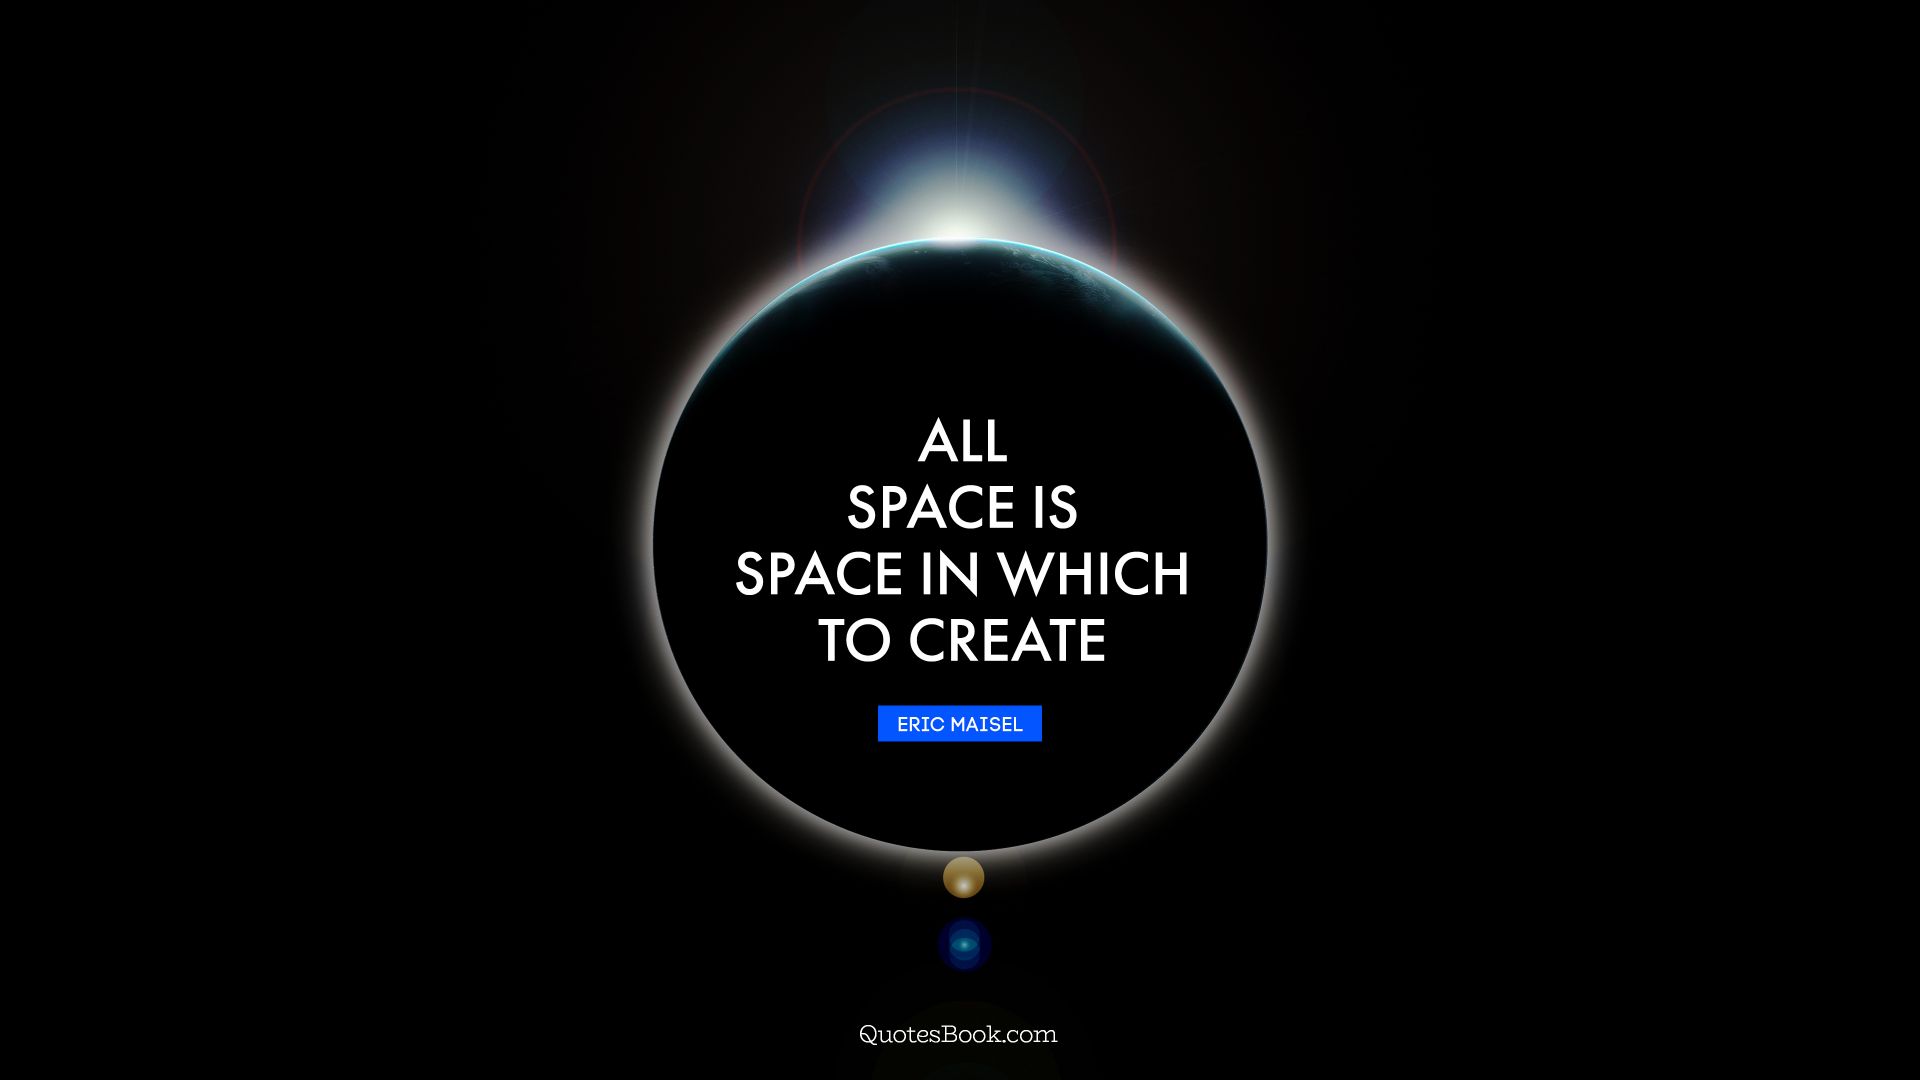 All space is space in which to create. - Quote by Eric Maisel